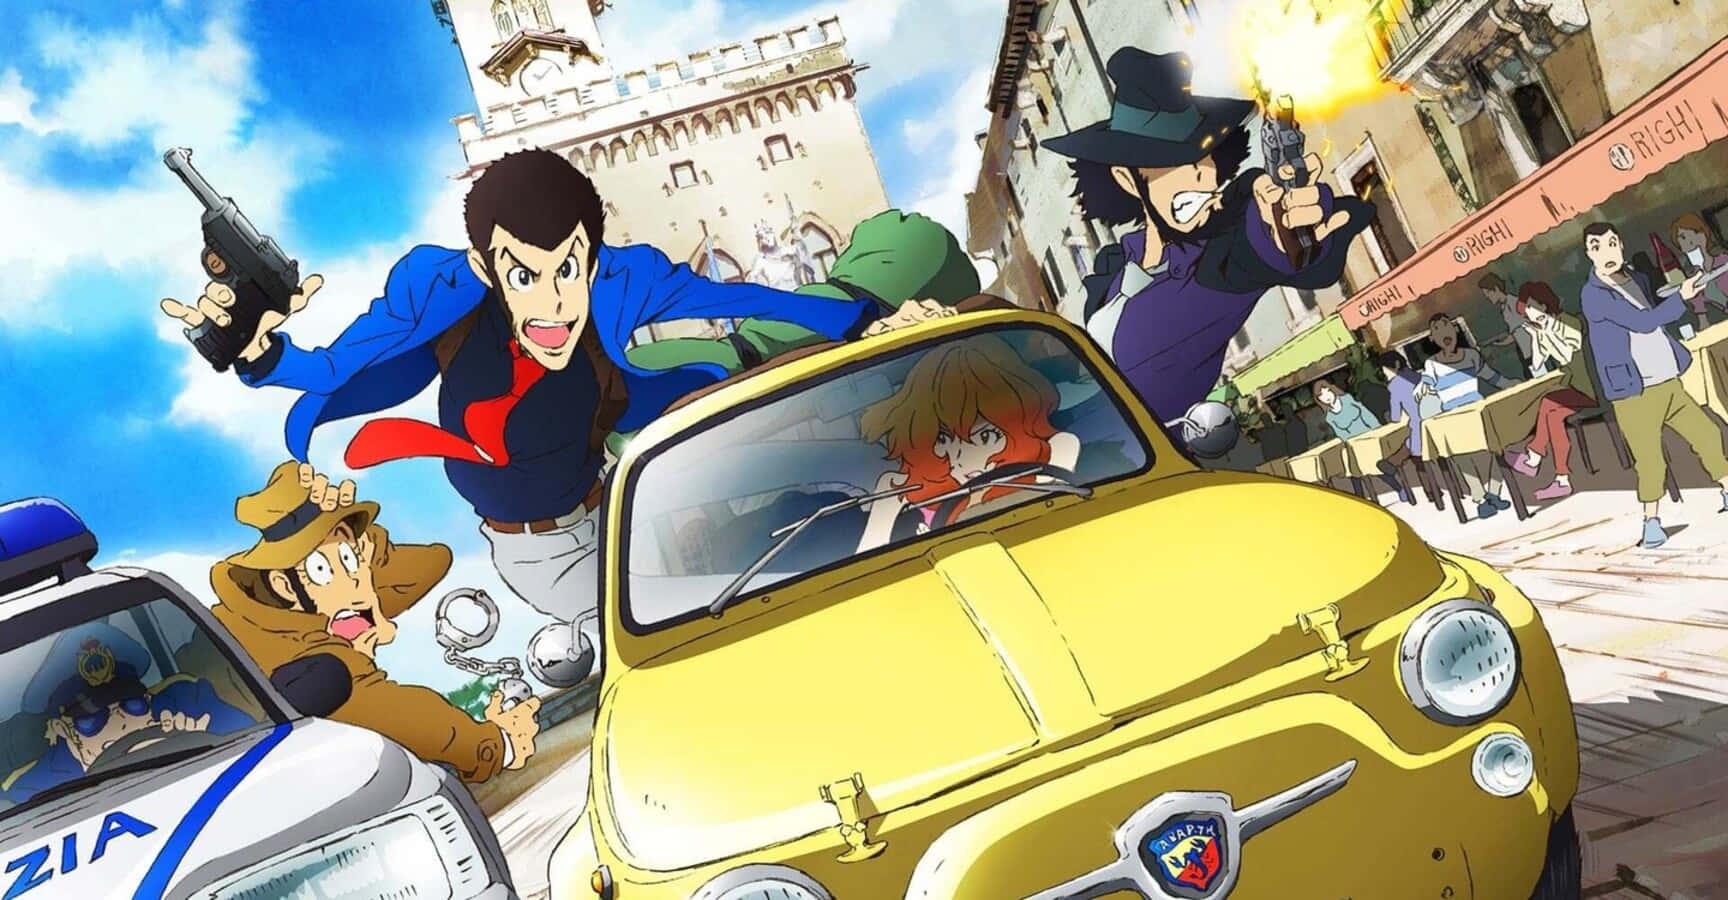 Lupin III and his gang in The Castle of Cagliostro Wallpaper